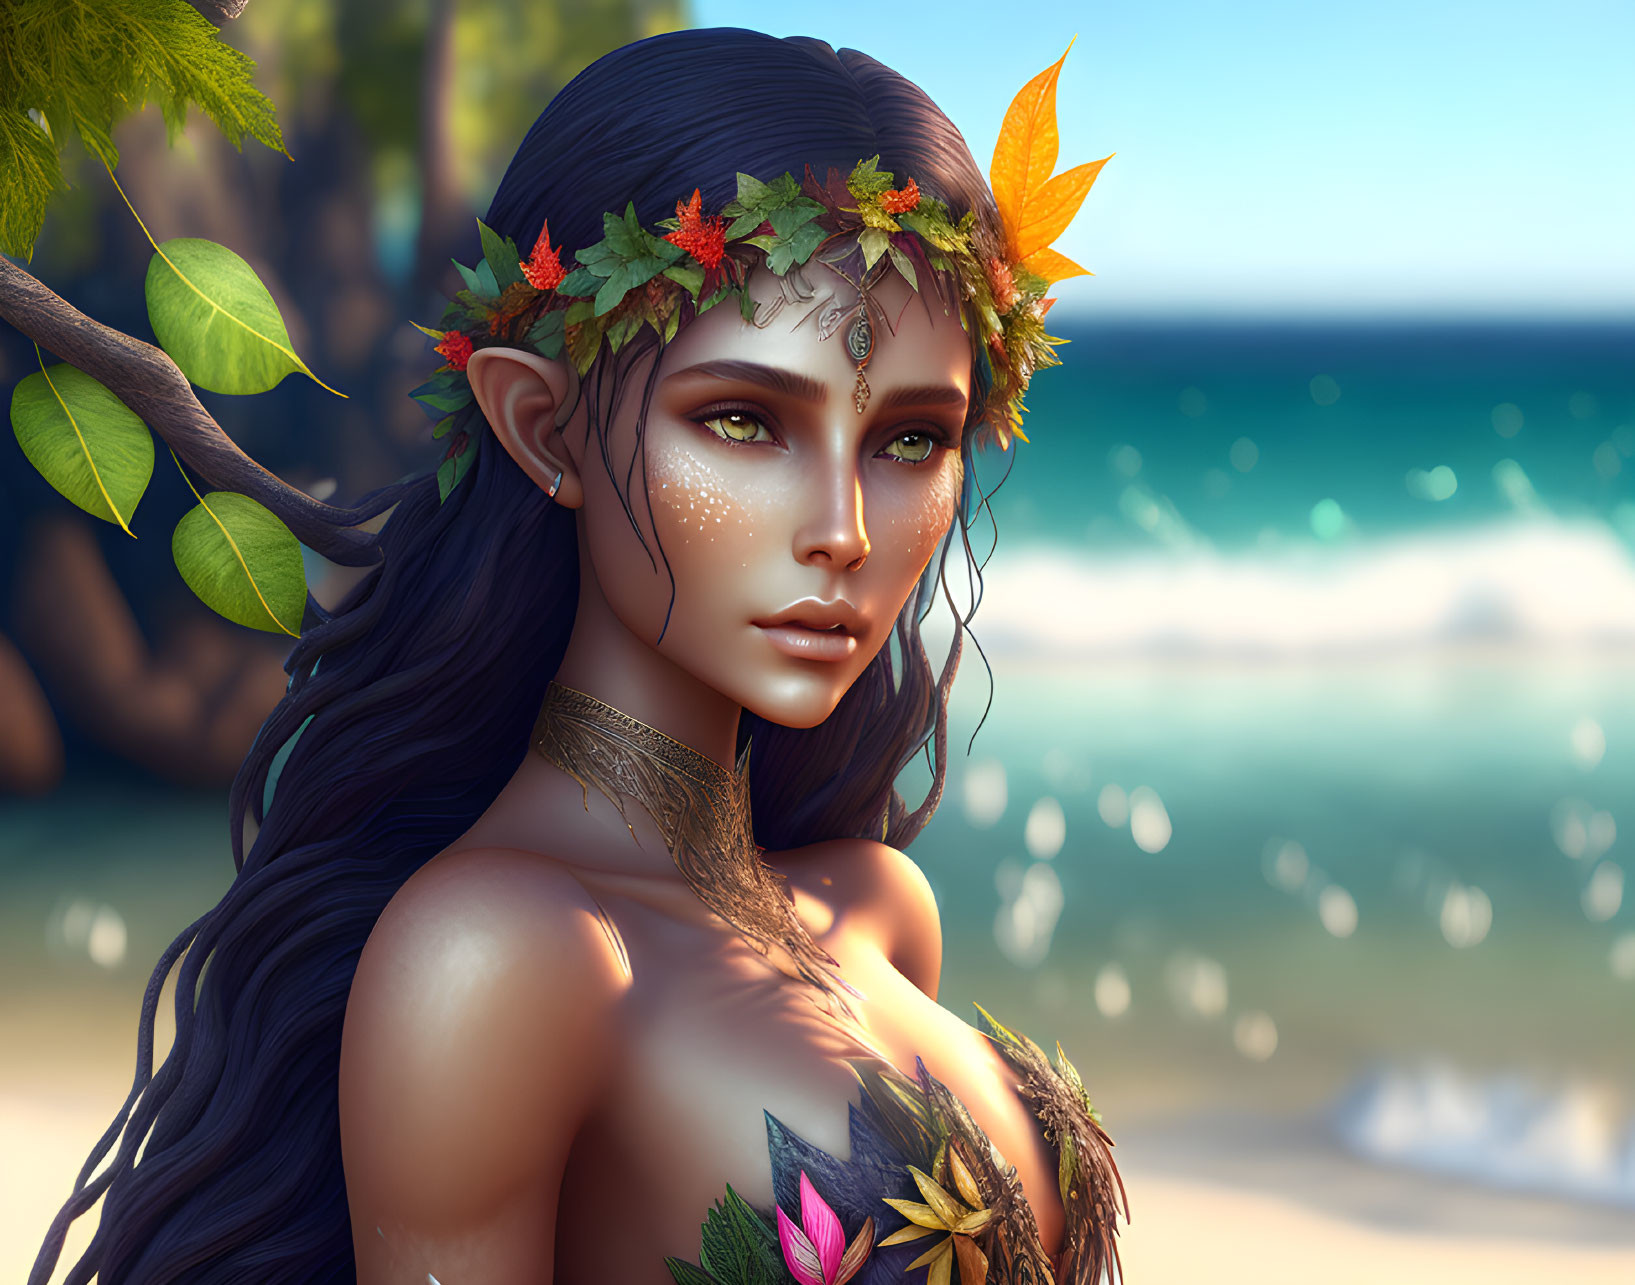 Forest elf in the beach